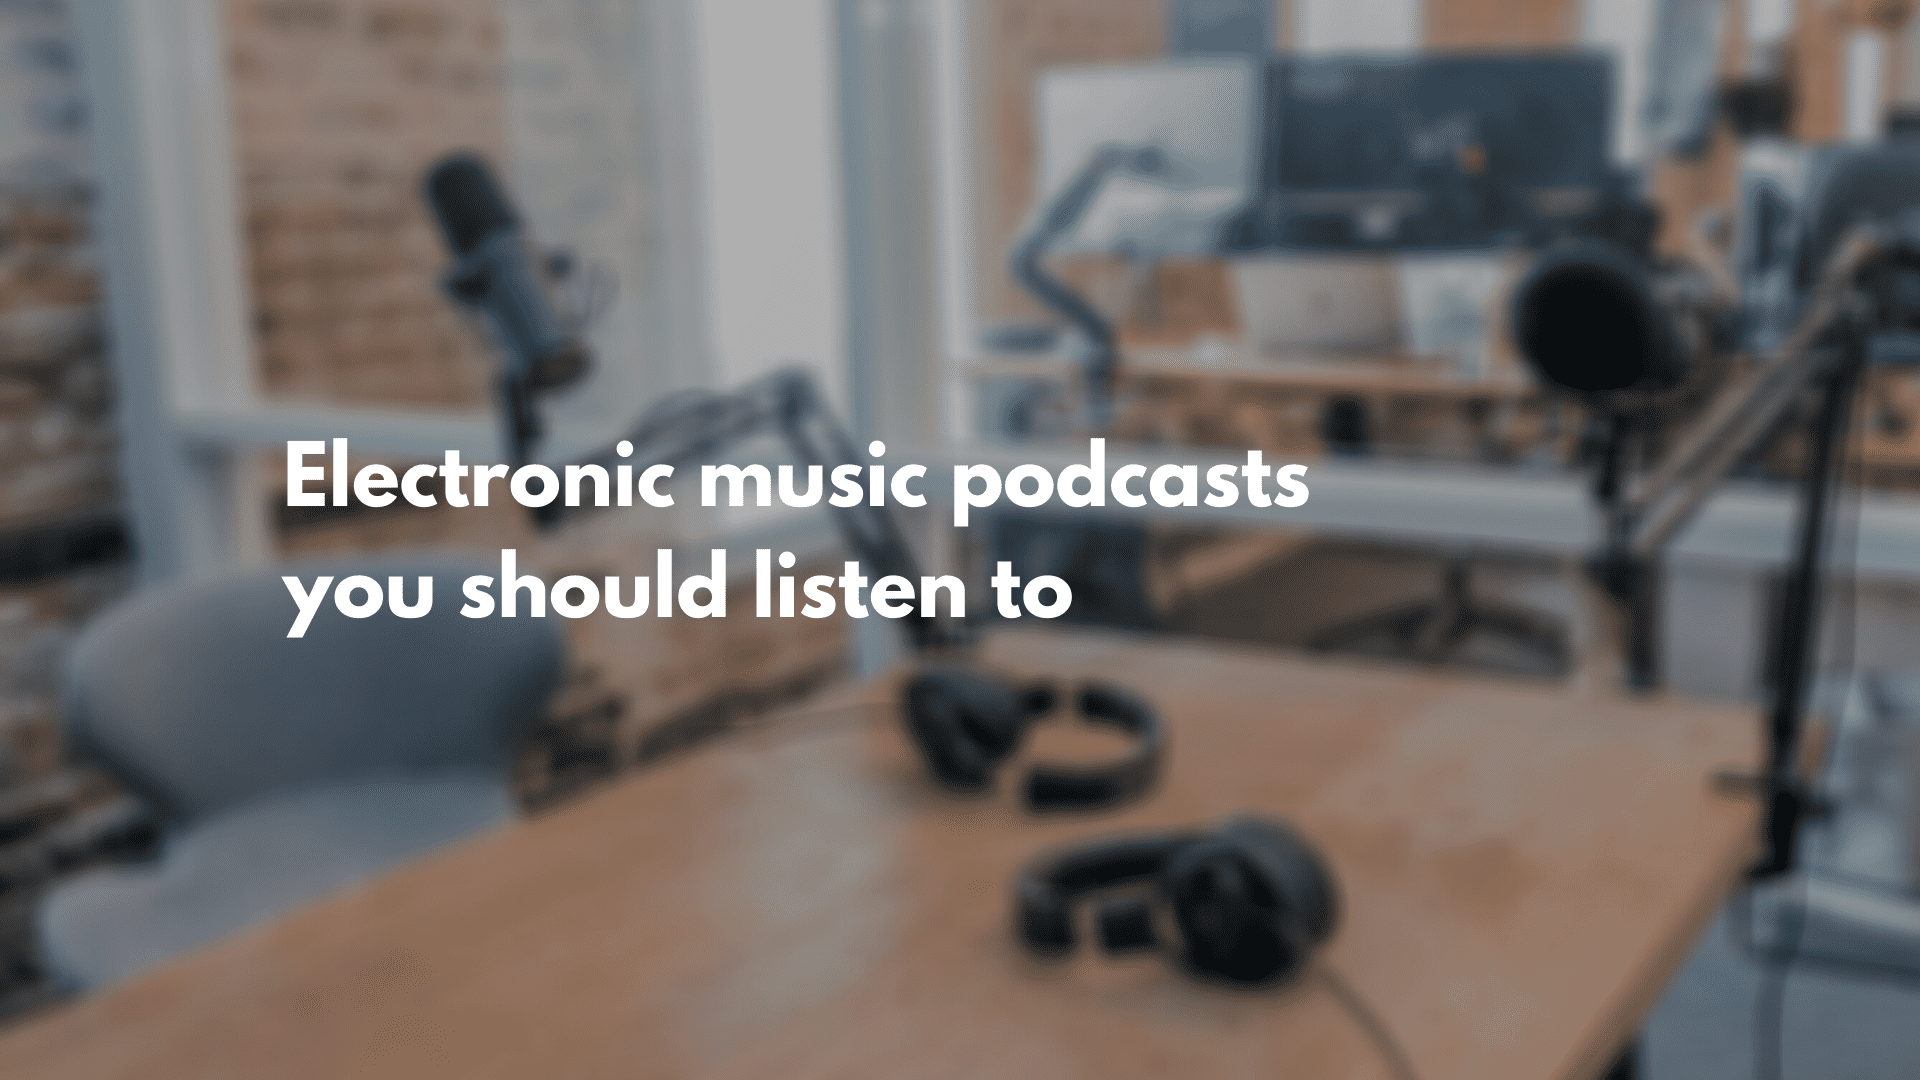 Four electronic music podcasts you should listen to